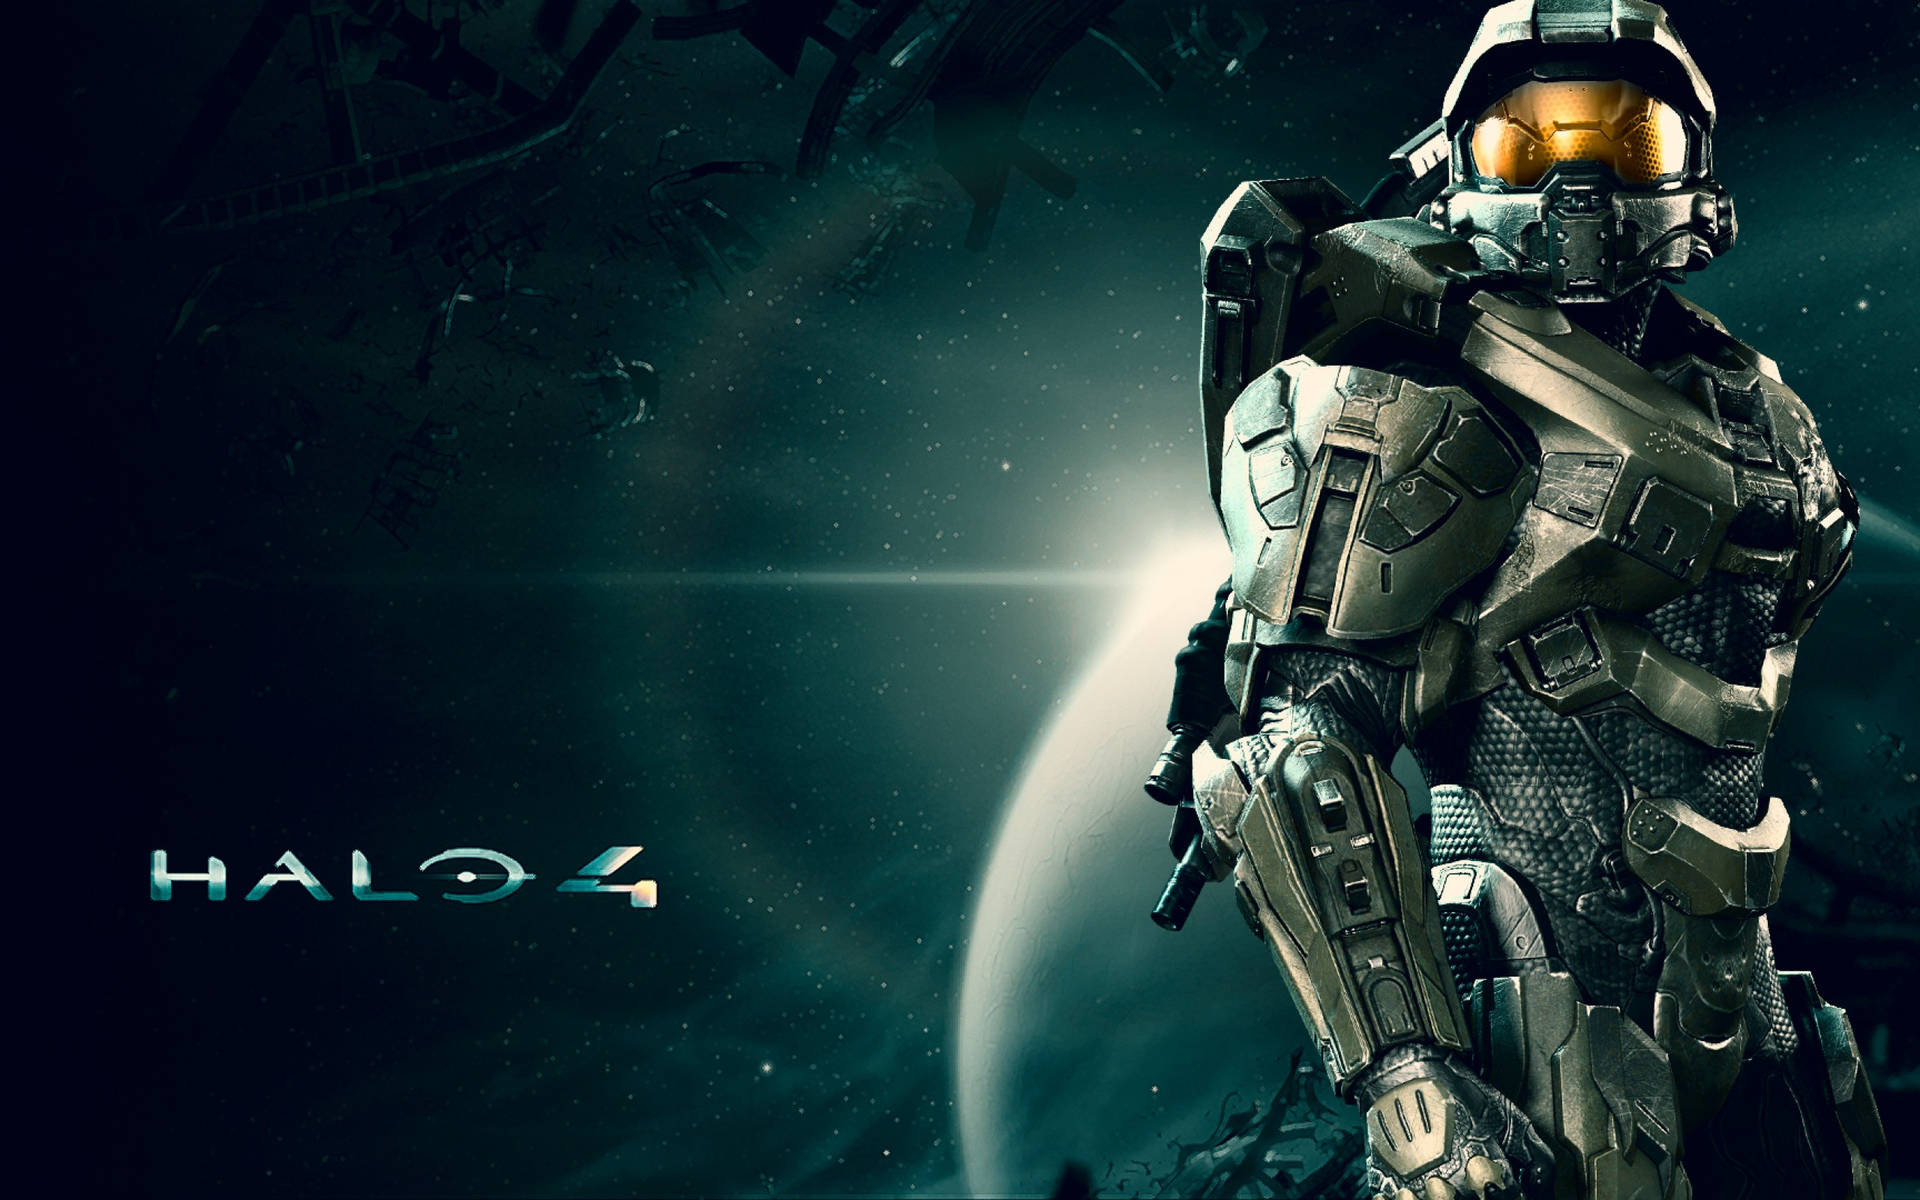 Halo 4 Video Game Cover Art